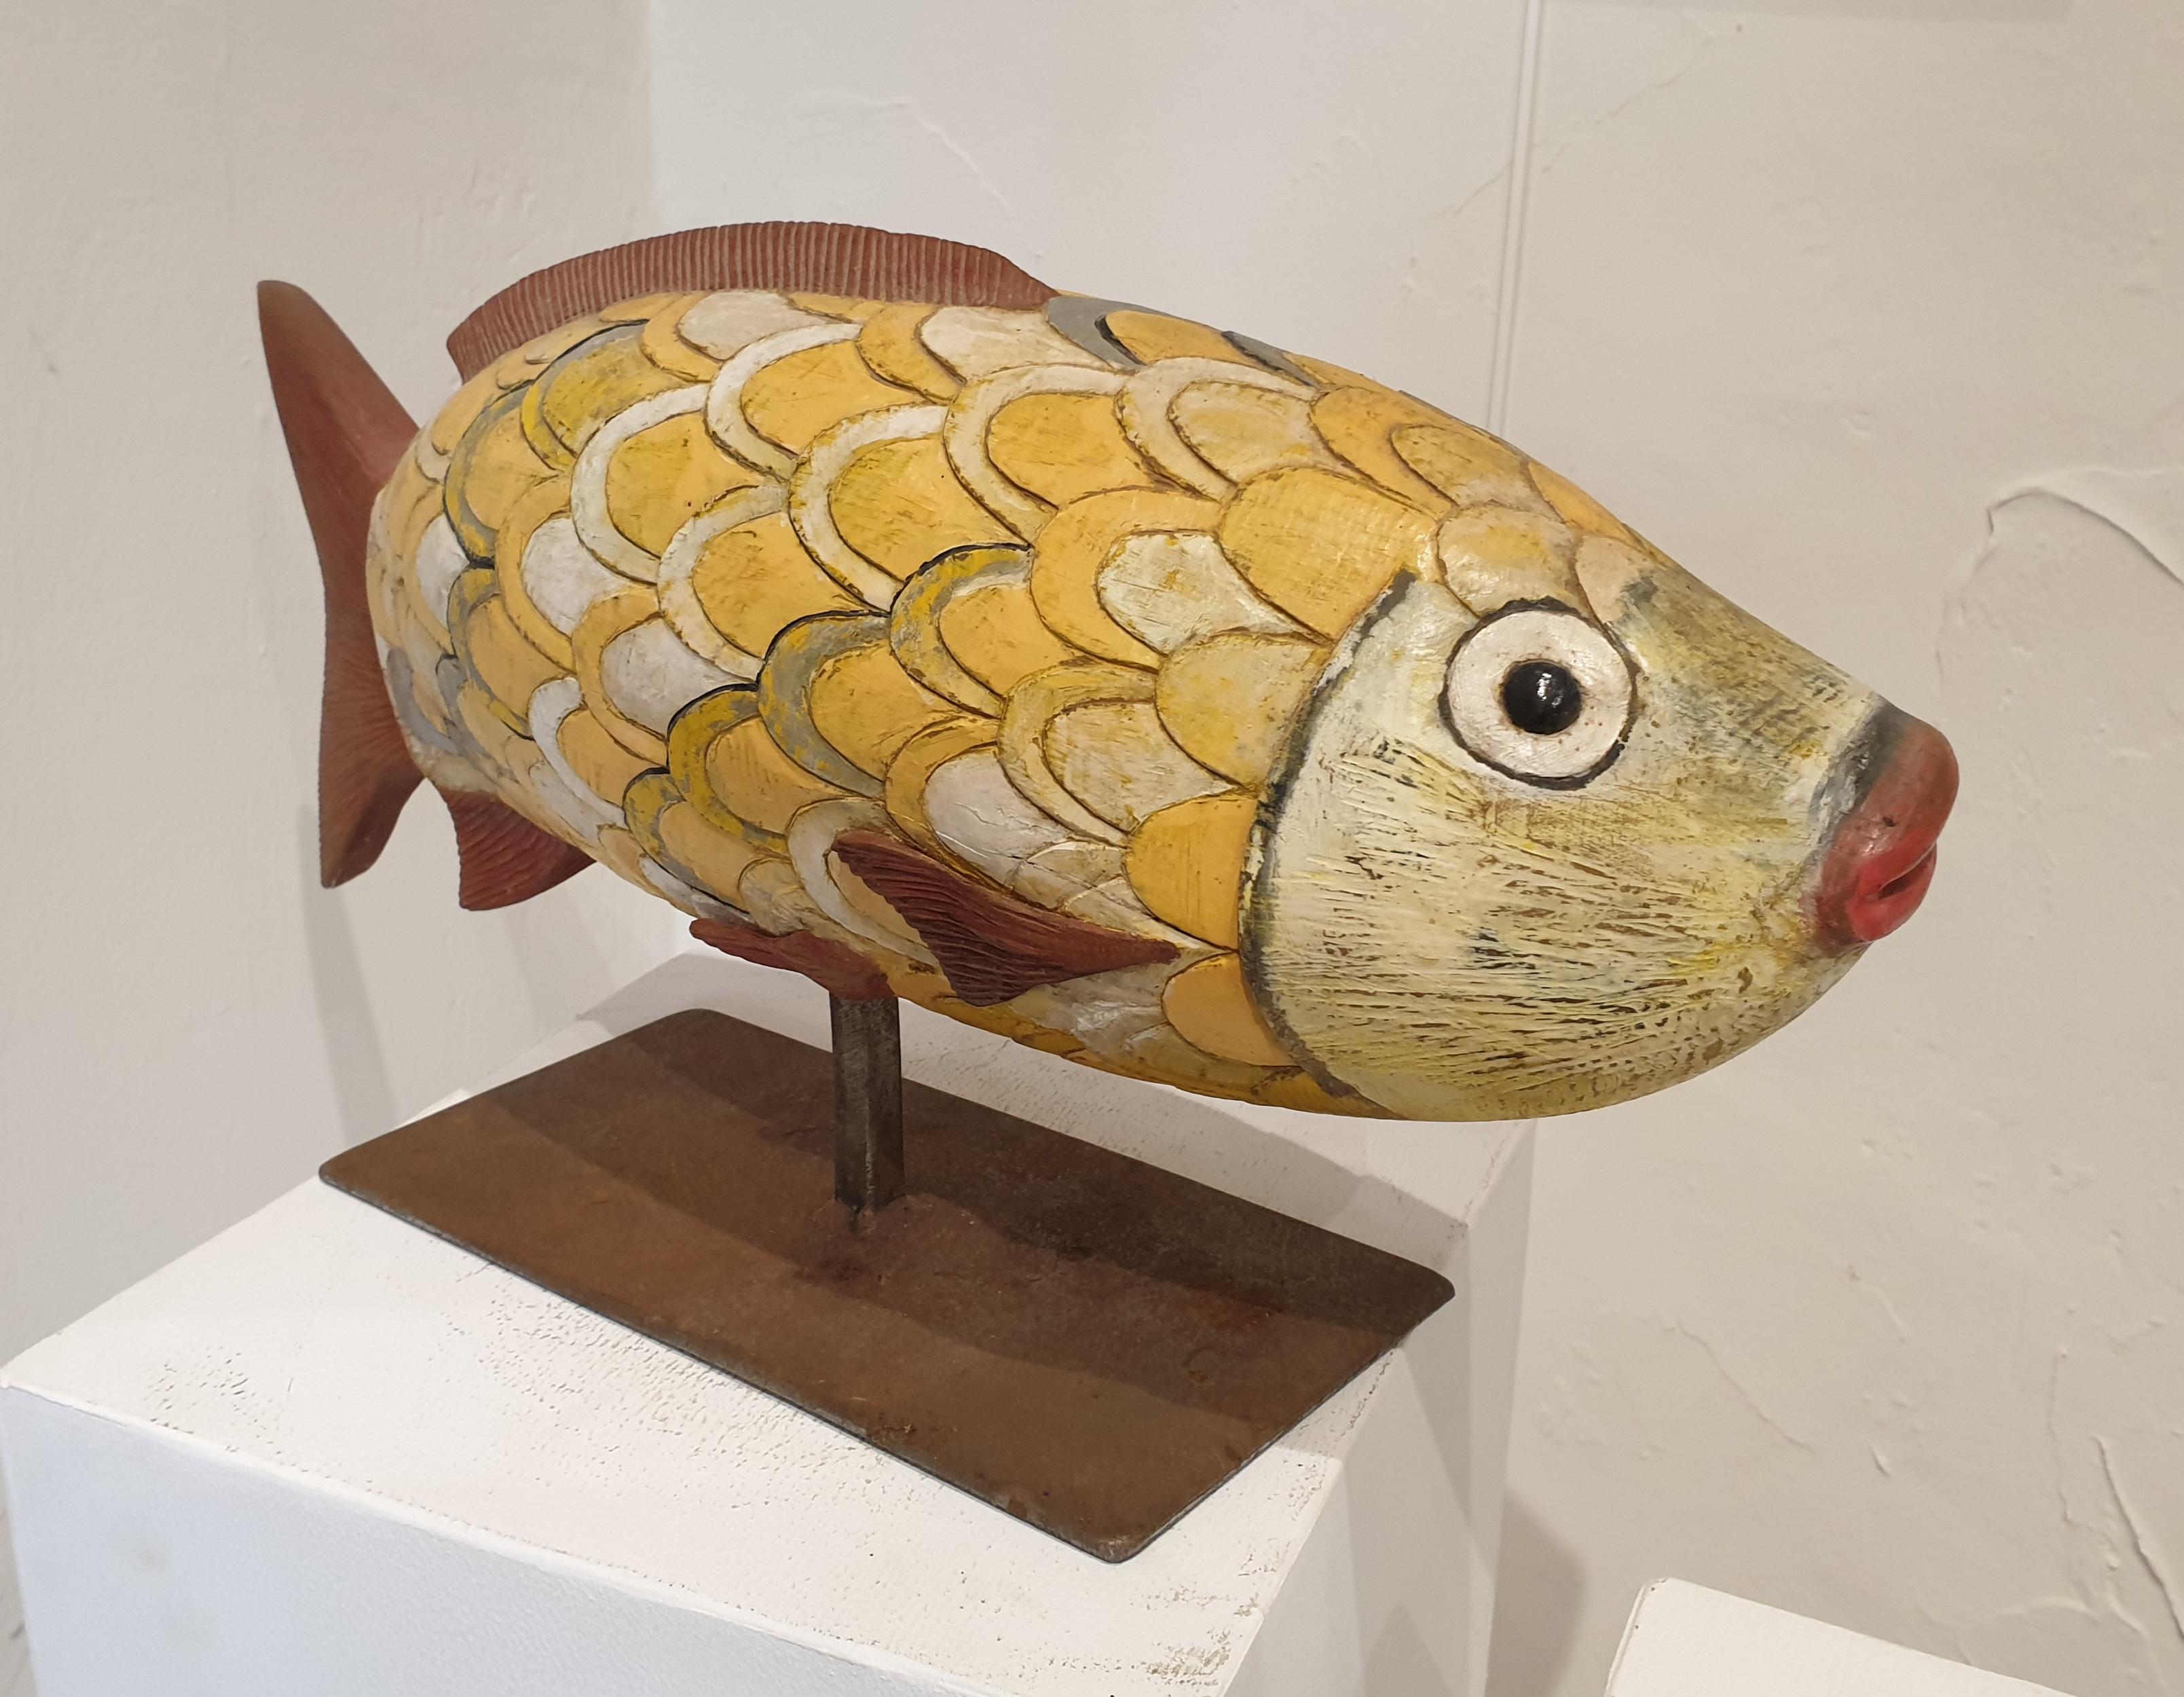 1980s sculpture of a fish carved in wood and colourfully painted in oils, presented on a metal base and tige, by French artist Nicolas Valabrègue, signed and dated 1988 to the underside.

Born in 1950 in Marseille (Bouche-du-Rhône), Nicolas